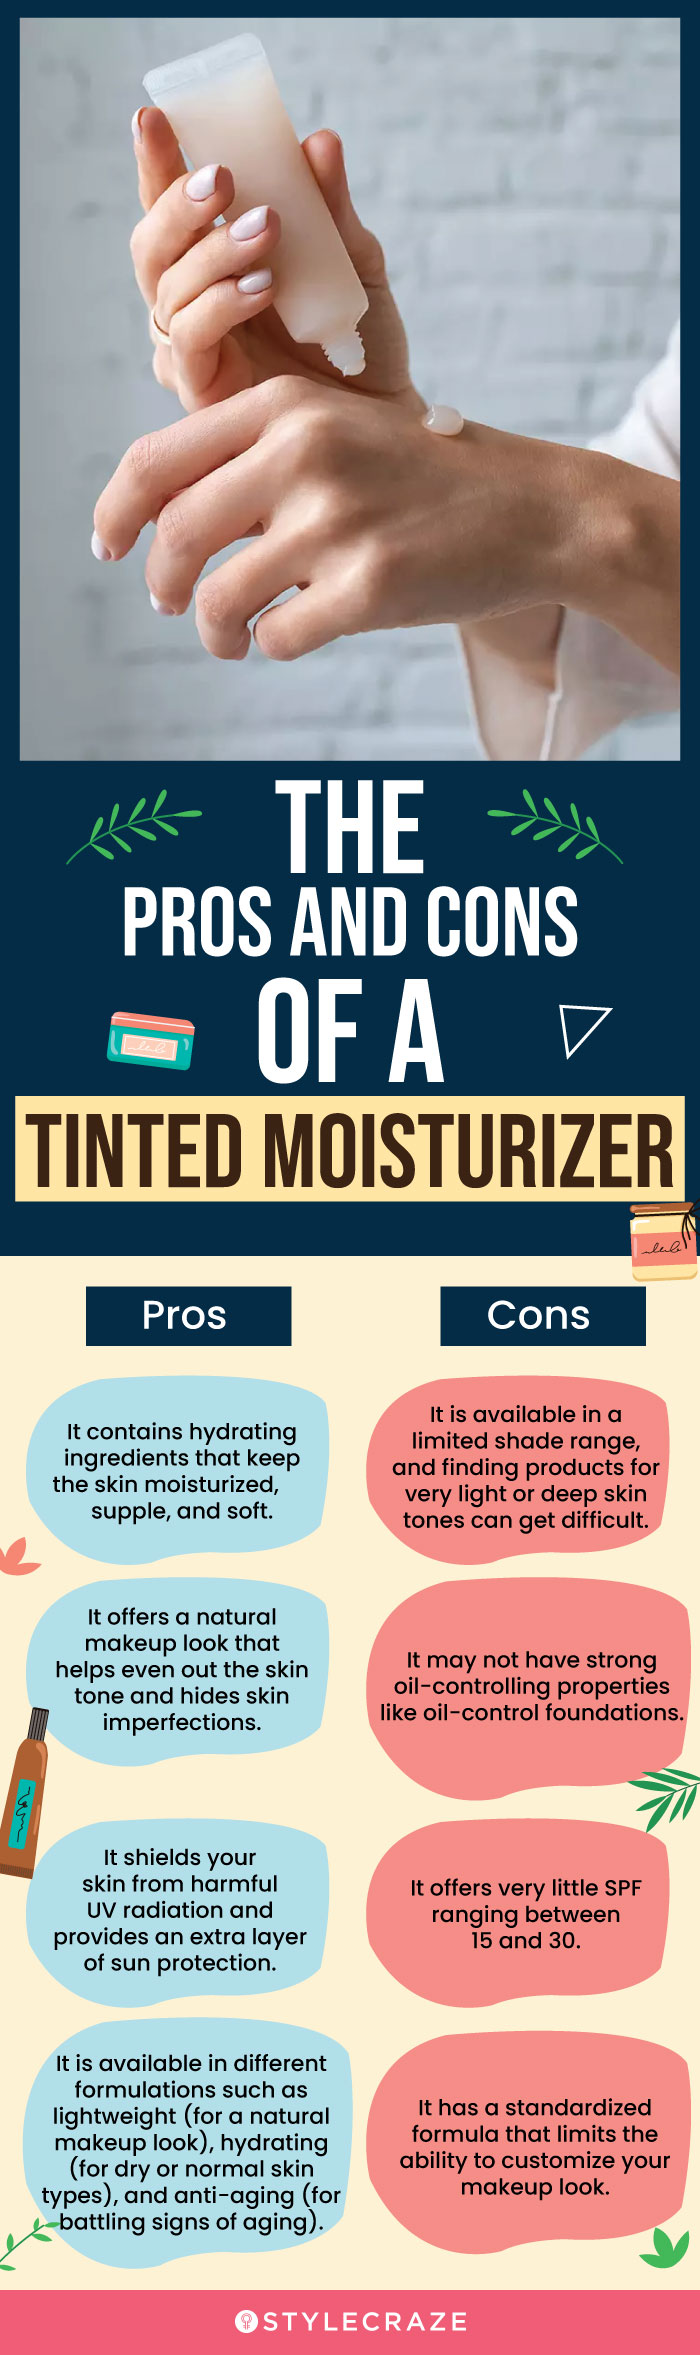 The Pros And Cons Of A Tinted Moisturizer (infographic)